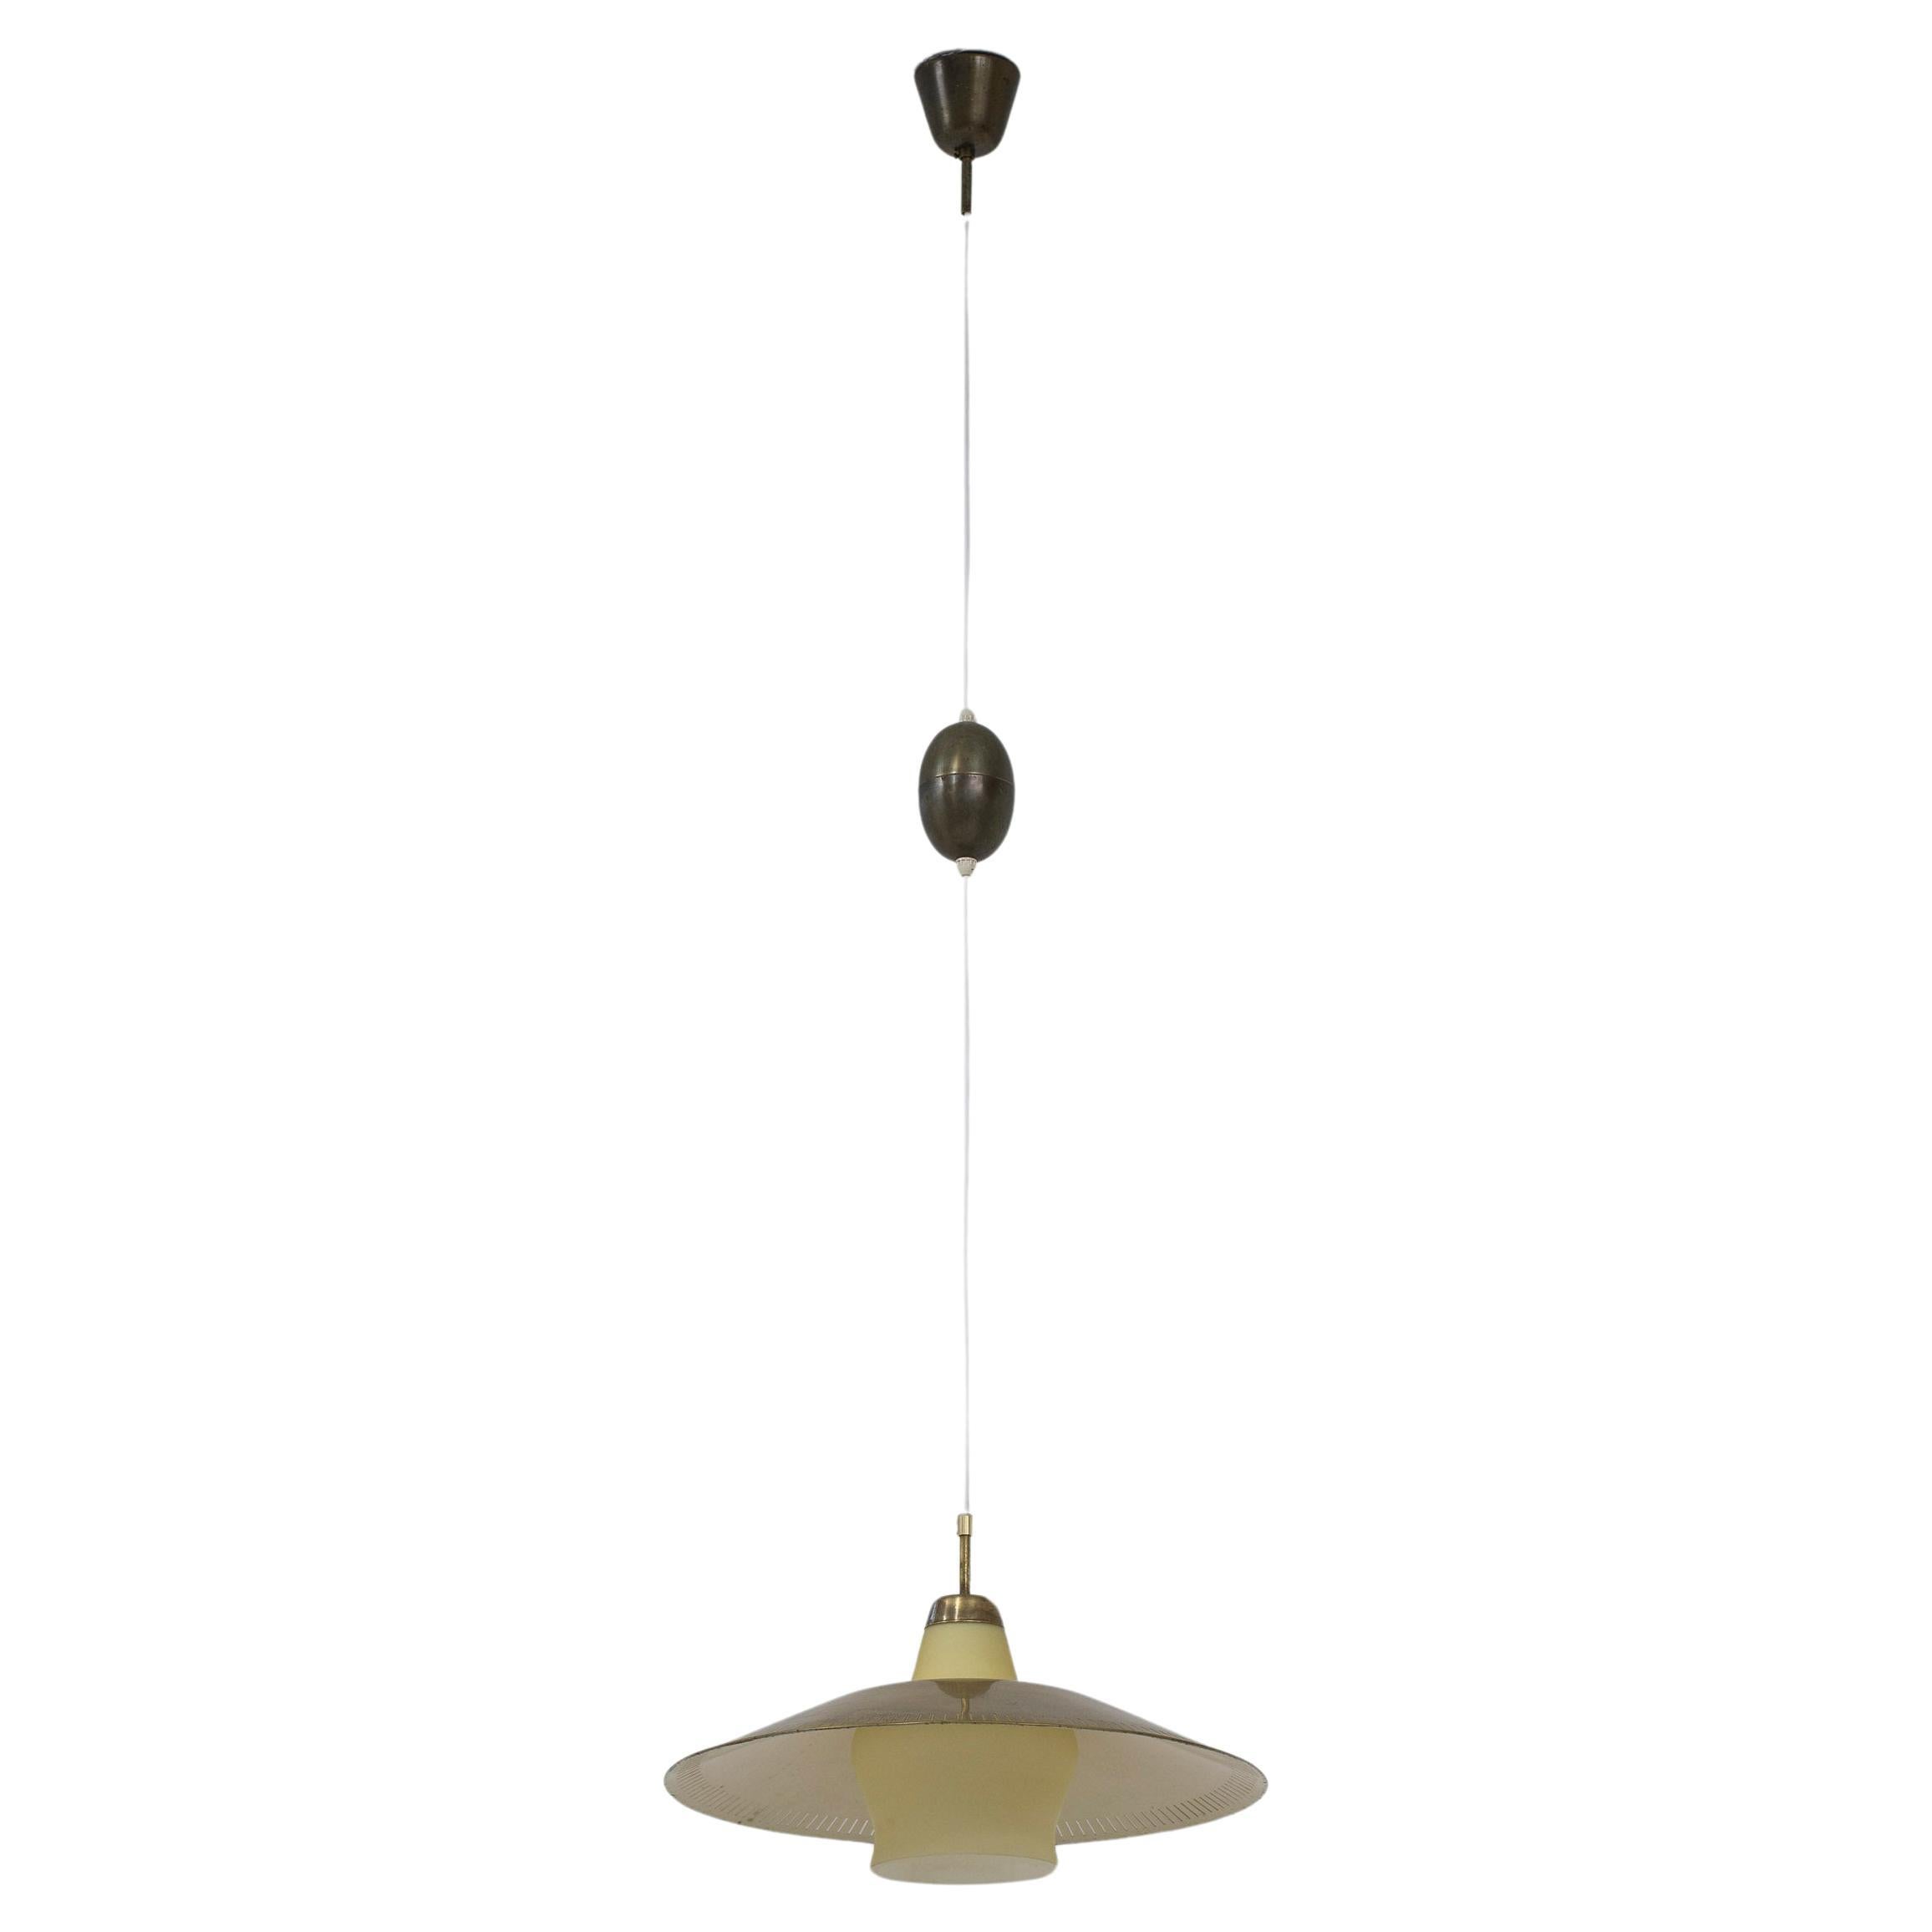 Ceiling pendant light in brass, glass by Harald Notini, Böhlmarks, Sweden, 1940s For Sale